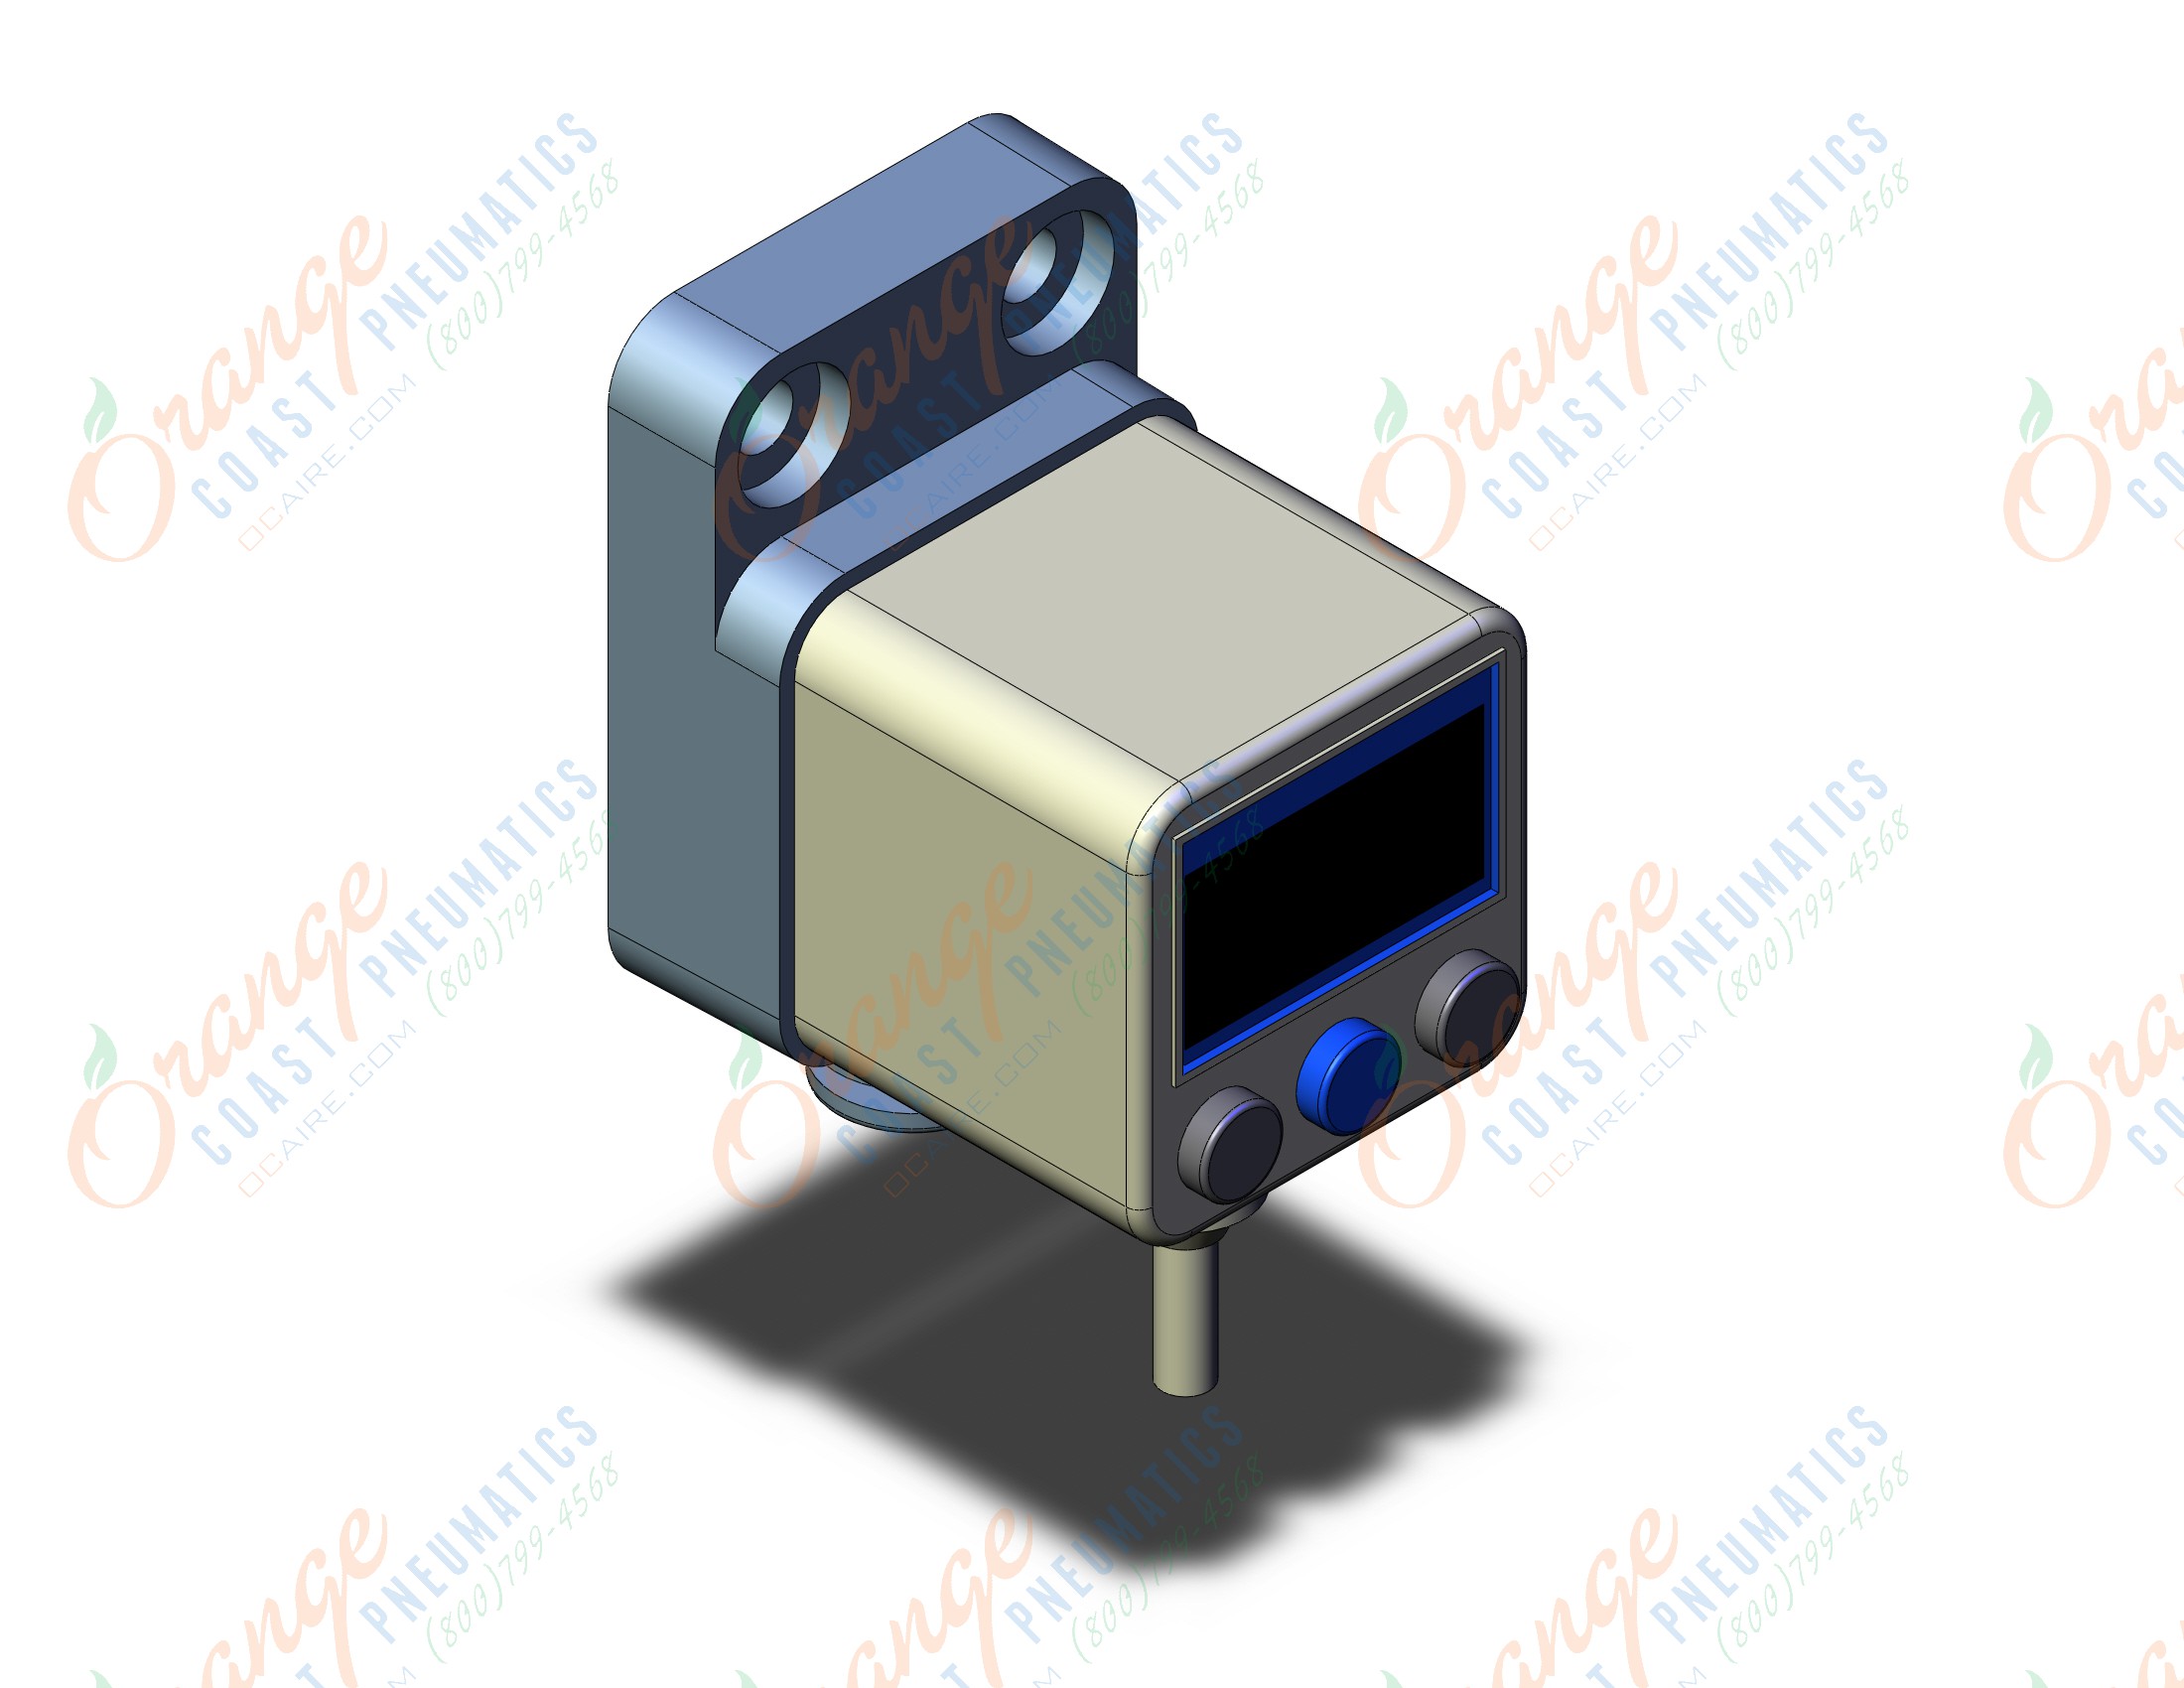 SMC ISE40A-C6-X-P-X501 ise40/50/60 other sz (other), ISE40/50/60 PRESSURE SWITCH